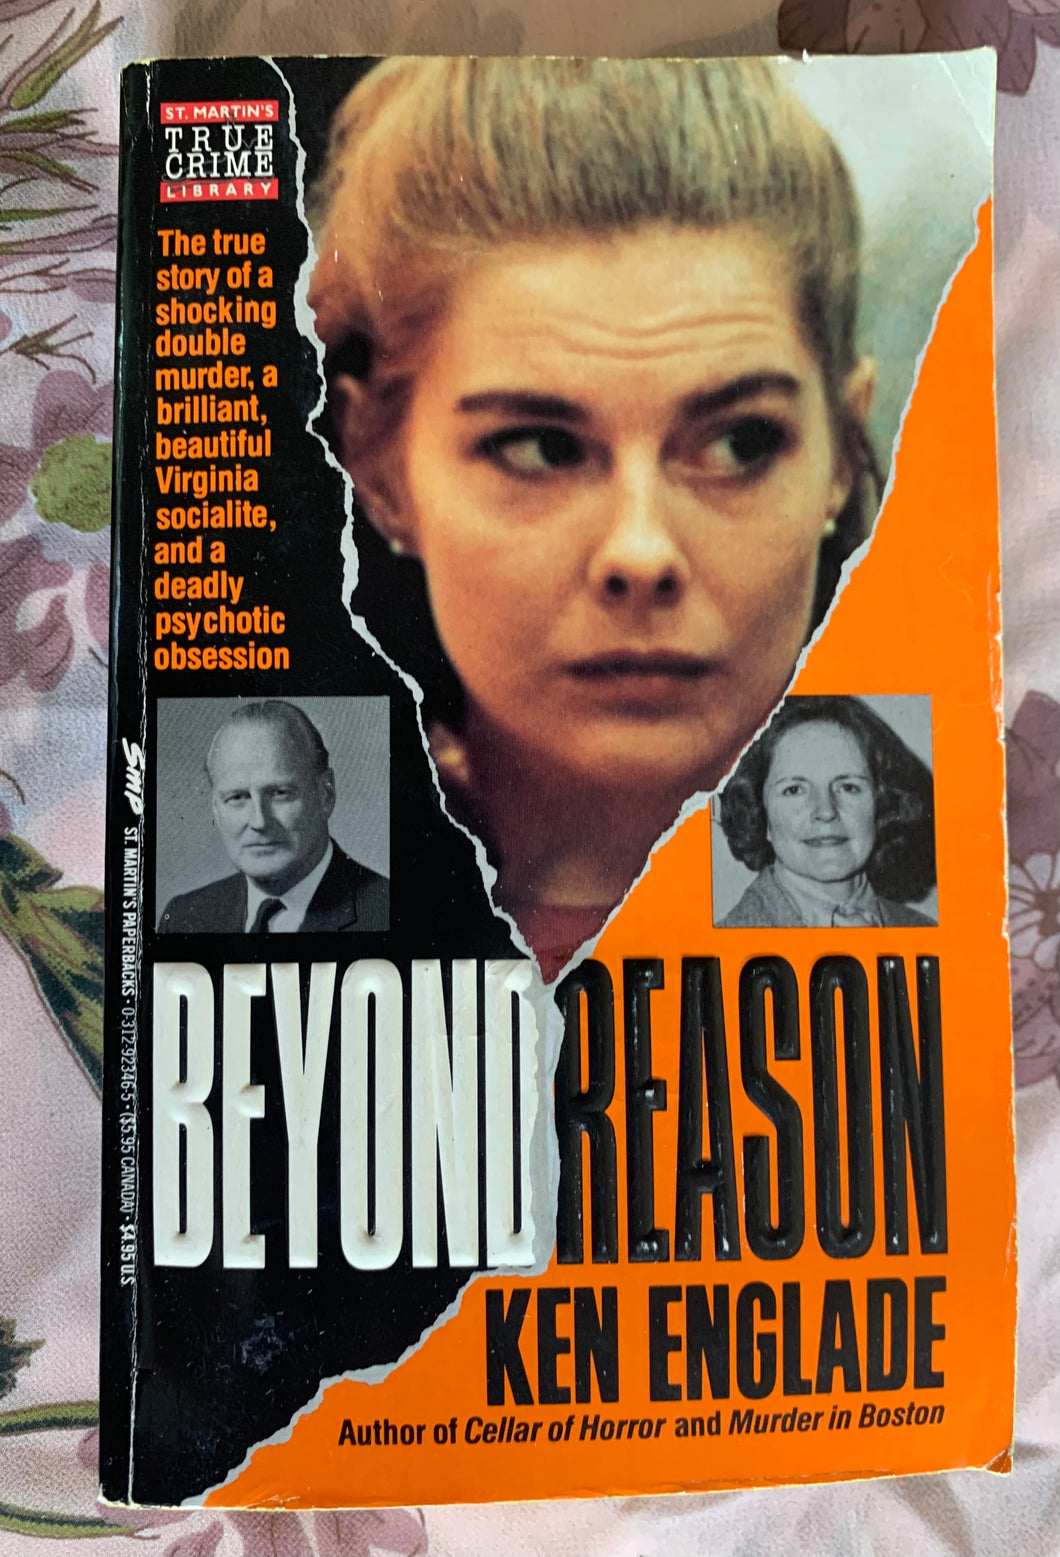 Beyond Reason: The True Story of a Shocking Double Murder, a Brilliant, Beautiful Virginia Socialite, and a Deadly Psychotic Obsession